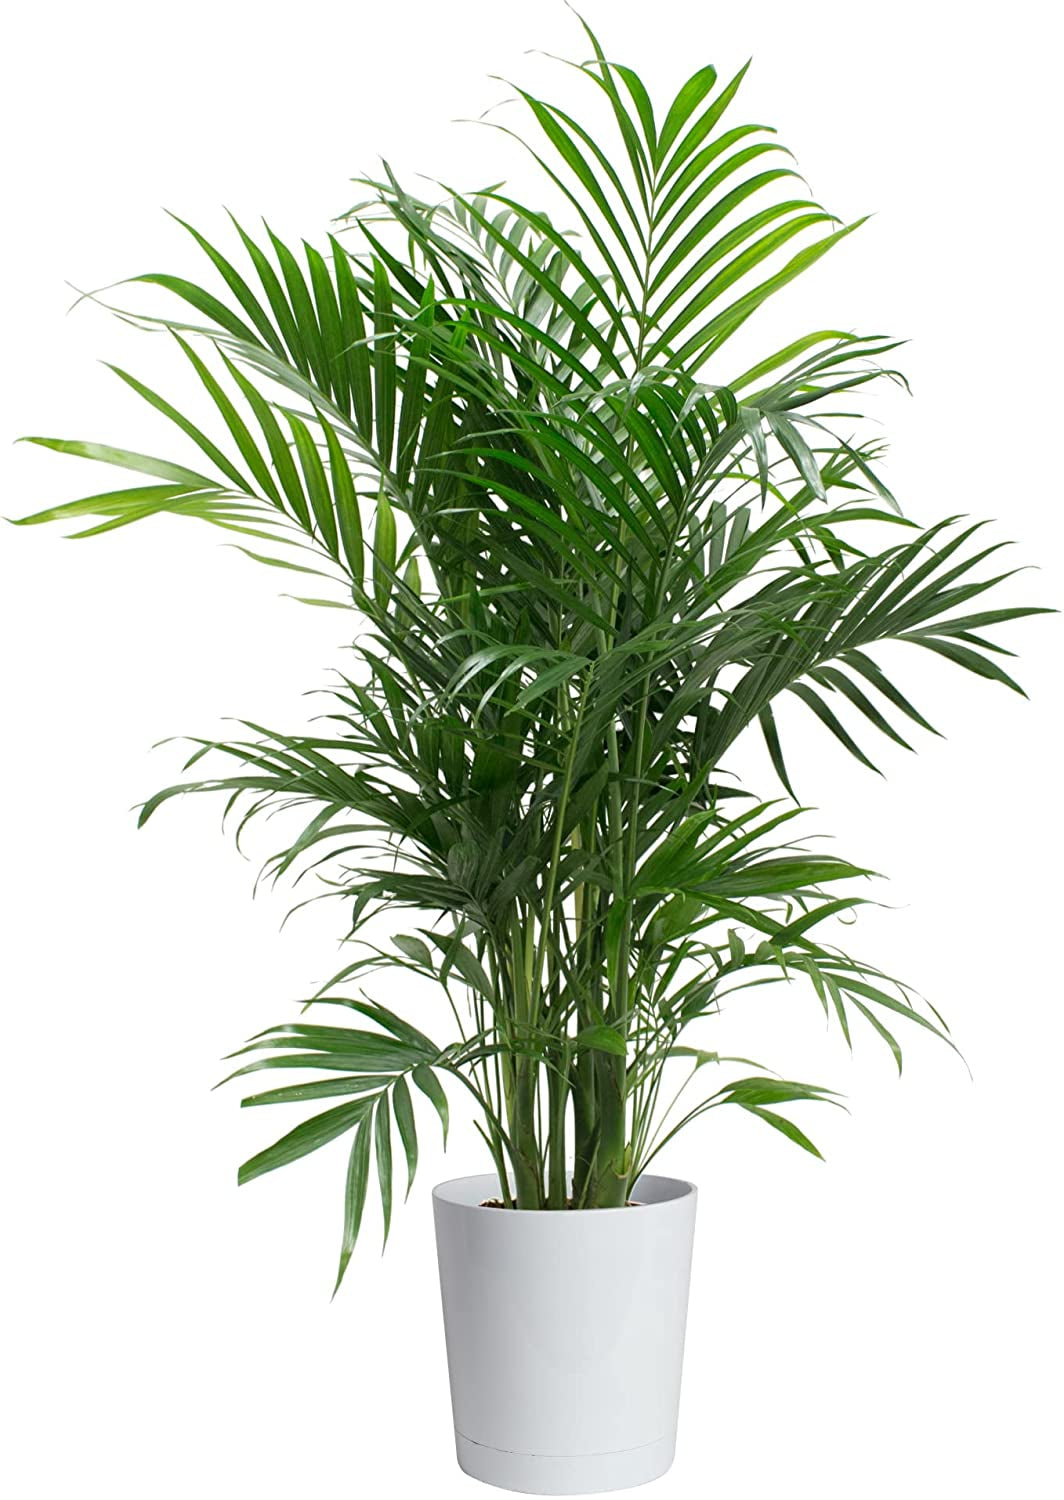 Cat Palm, Chamaedorea Palm Tree, Live Indoor Plant, 3 to 4-Feet Tall, Ships with Décor Planter, Fresh from Our Farm, Excellent Gift